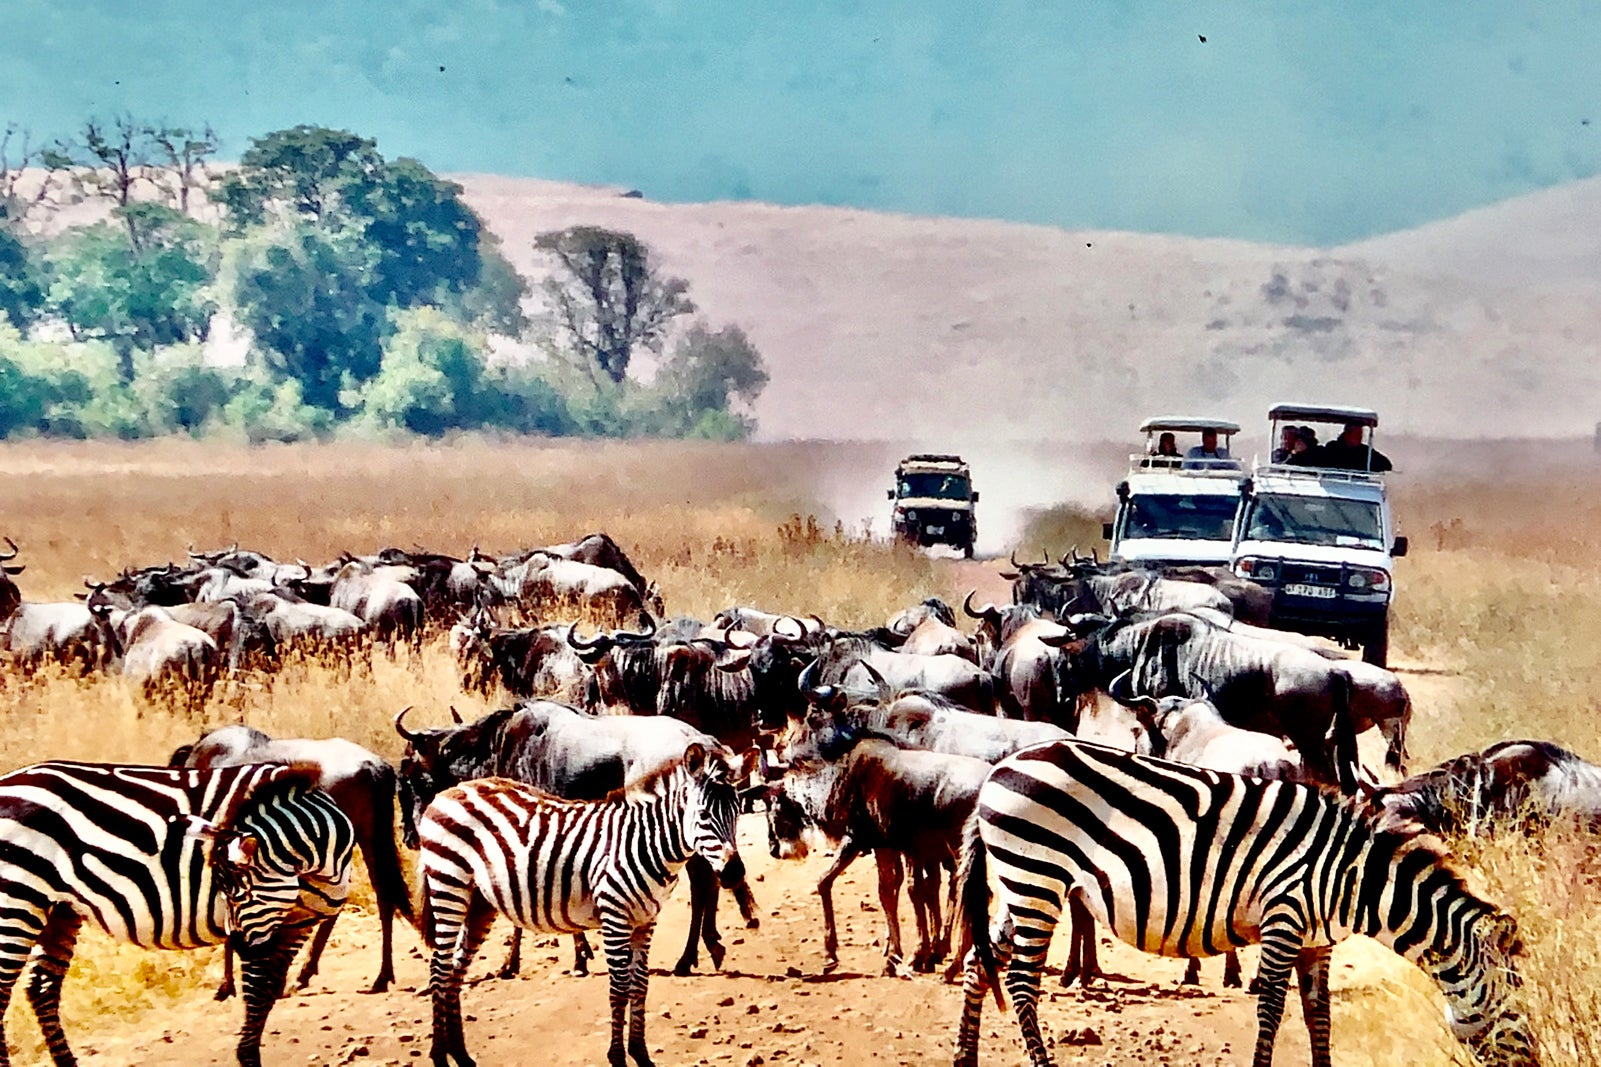 A photo of a dozen zebras wildebeests in Africa with three jeeps in the background.